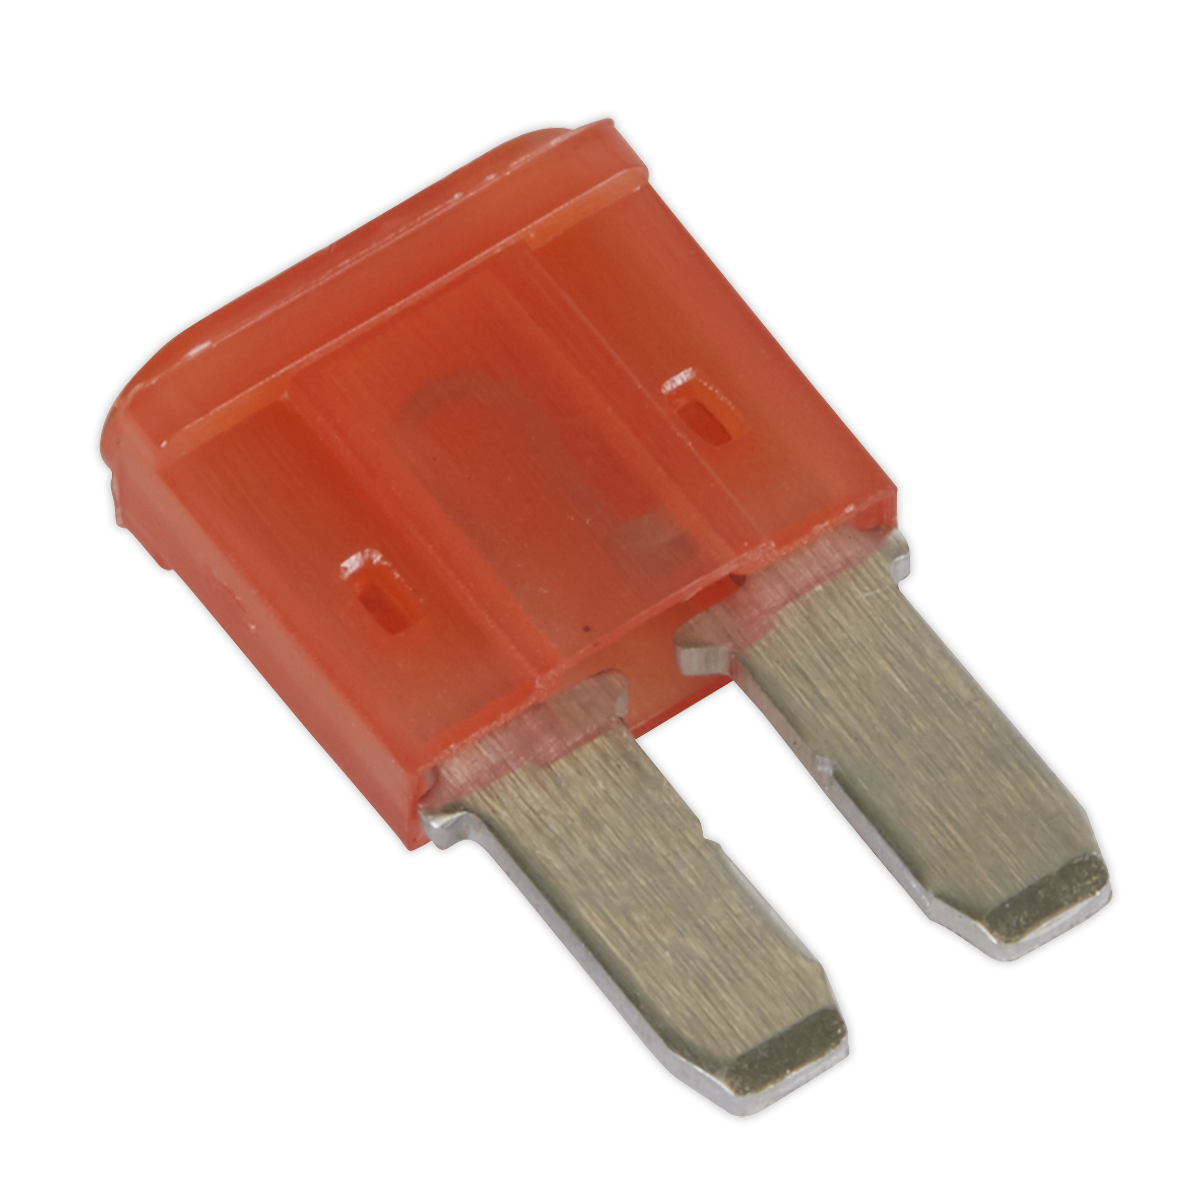 Sealey Automotive MICRO II Blade Fuse 10A - Pack of 50 M2BF1